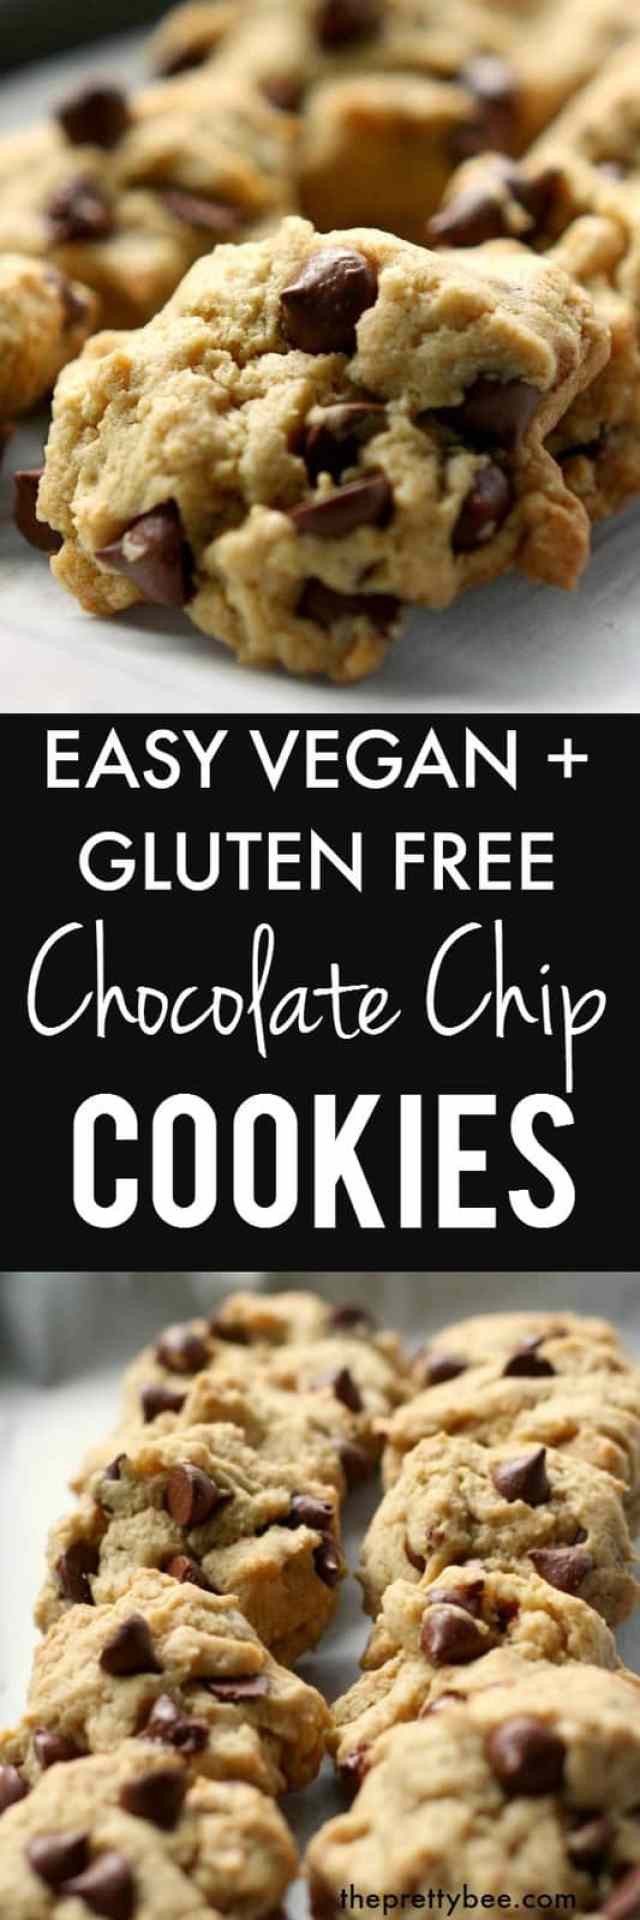 Vegan Gluten Free Cookie Recipes
 Easy Gluten Free and Vegan Chocolate Chip Cookies The